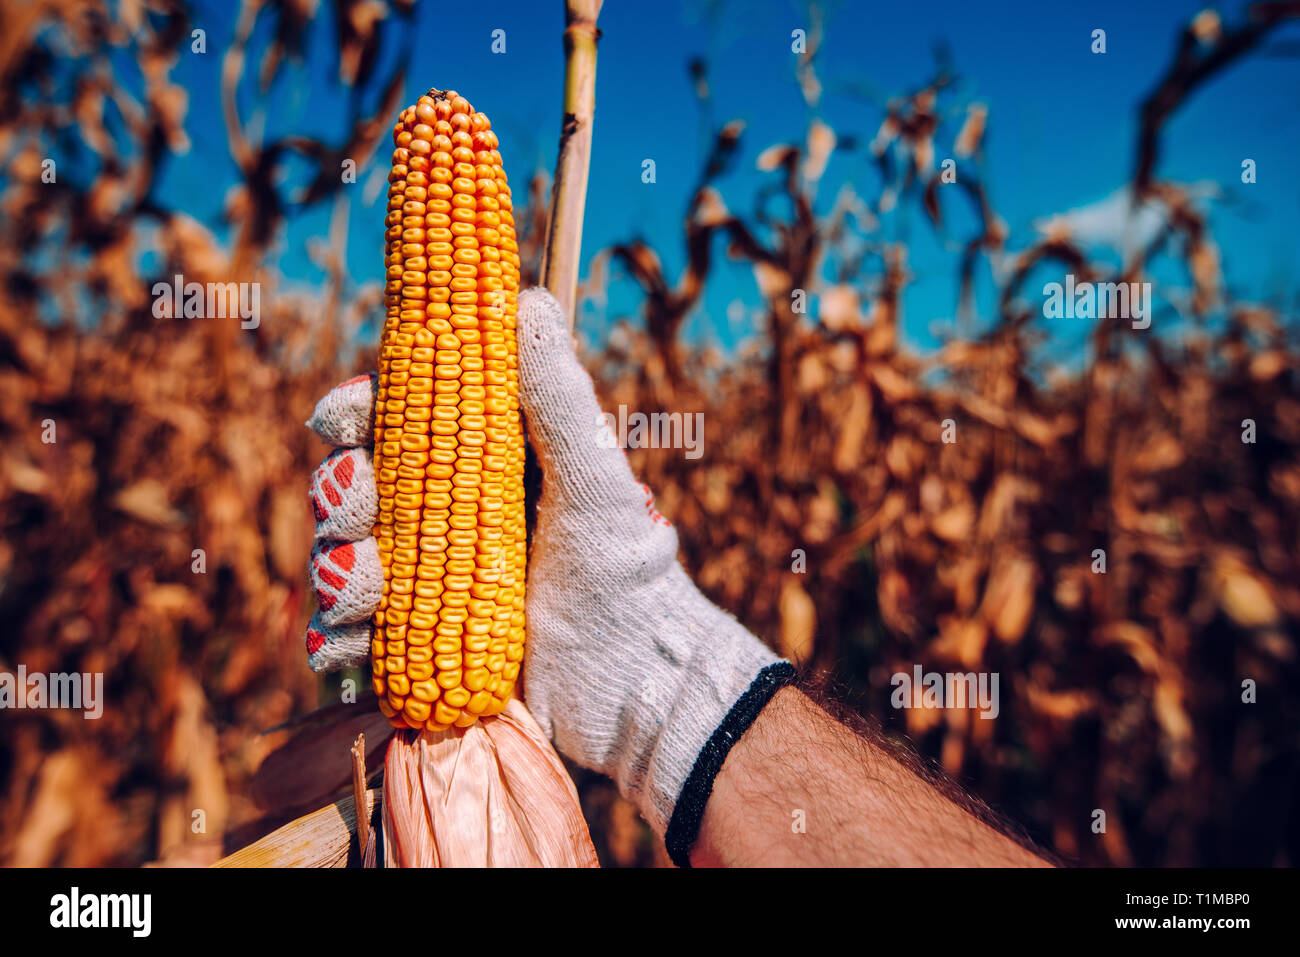 Hand picking corn cobs in field. Farmer harvesting ripe maize crops by hands. Stock Photo